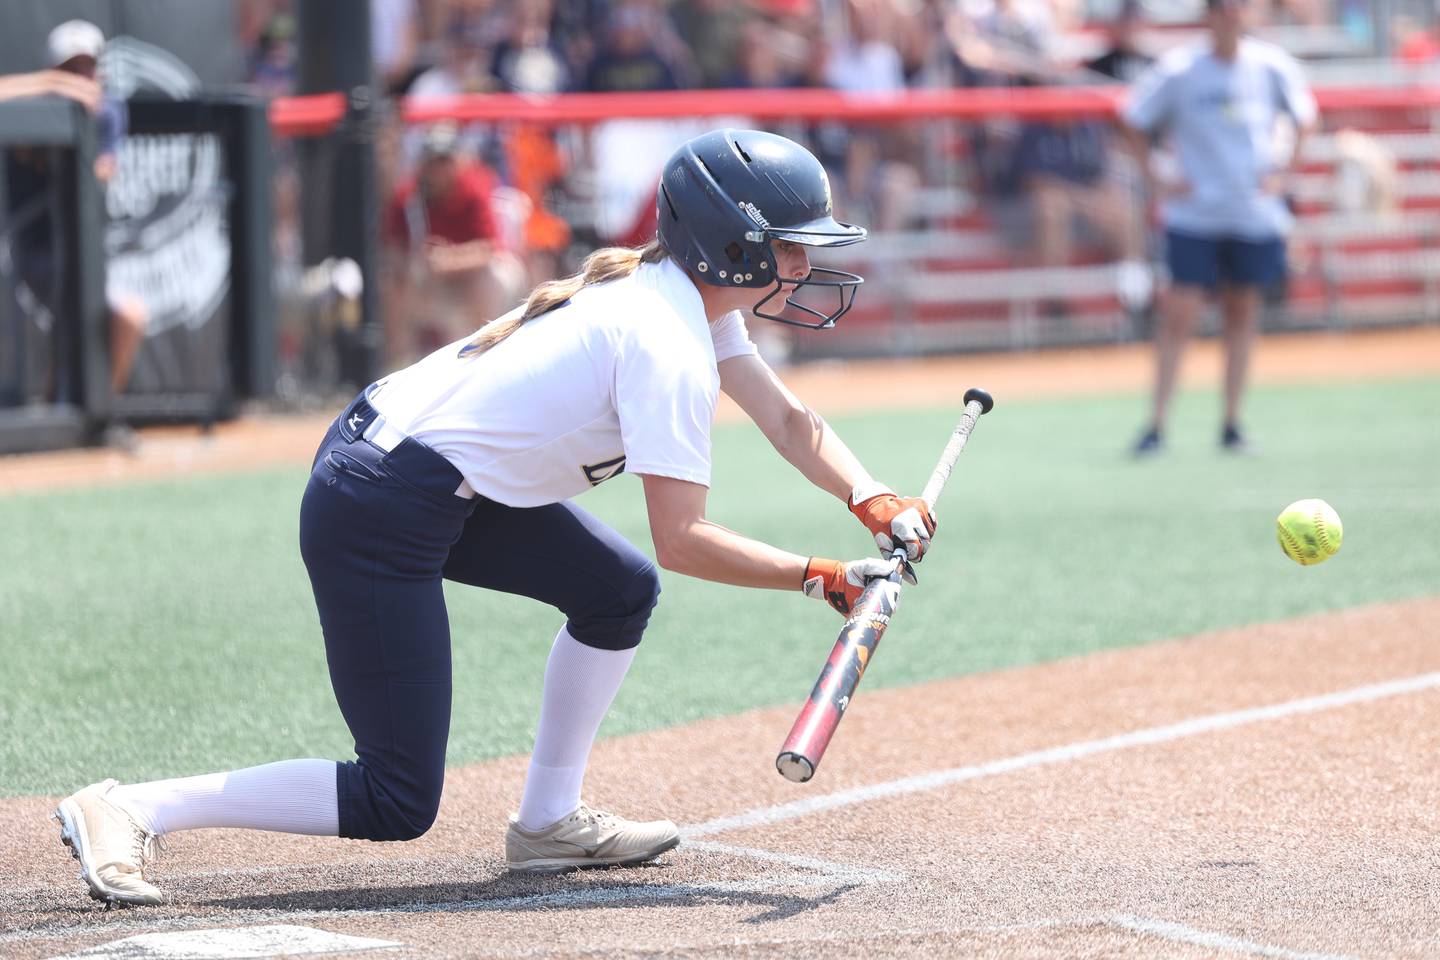 Lemont’s Nicole Pontrelli lays down a successful bunt in the 12th inning against Antioch in the Class 3A state championship game on Saturday, June 10, 2023 in Peoria.